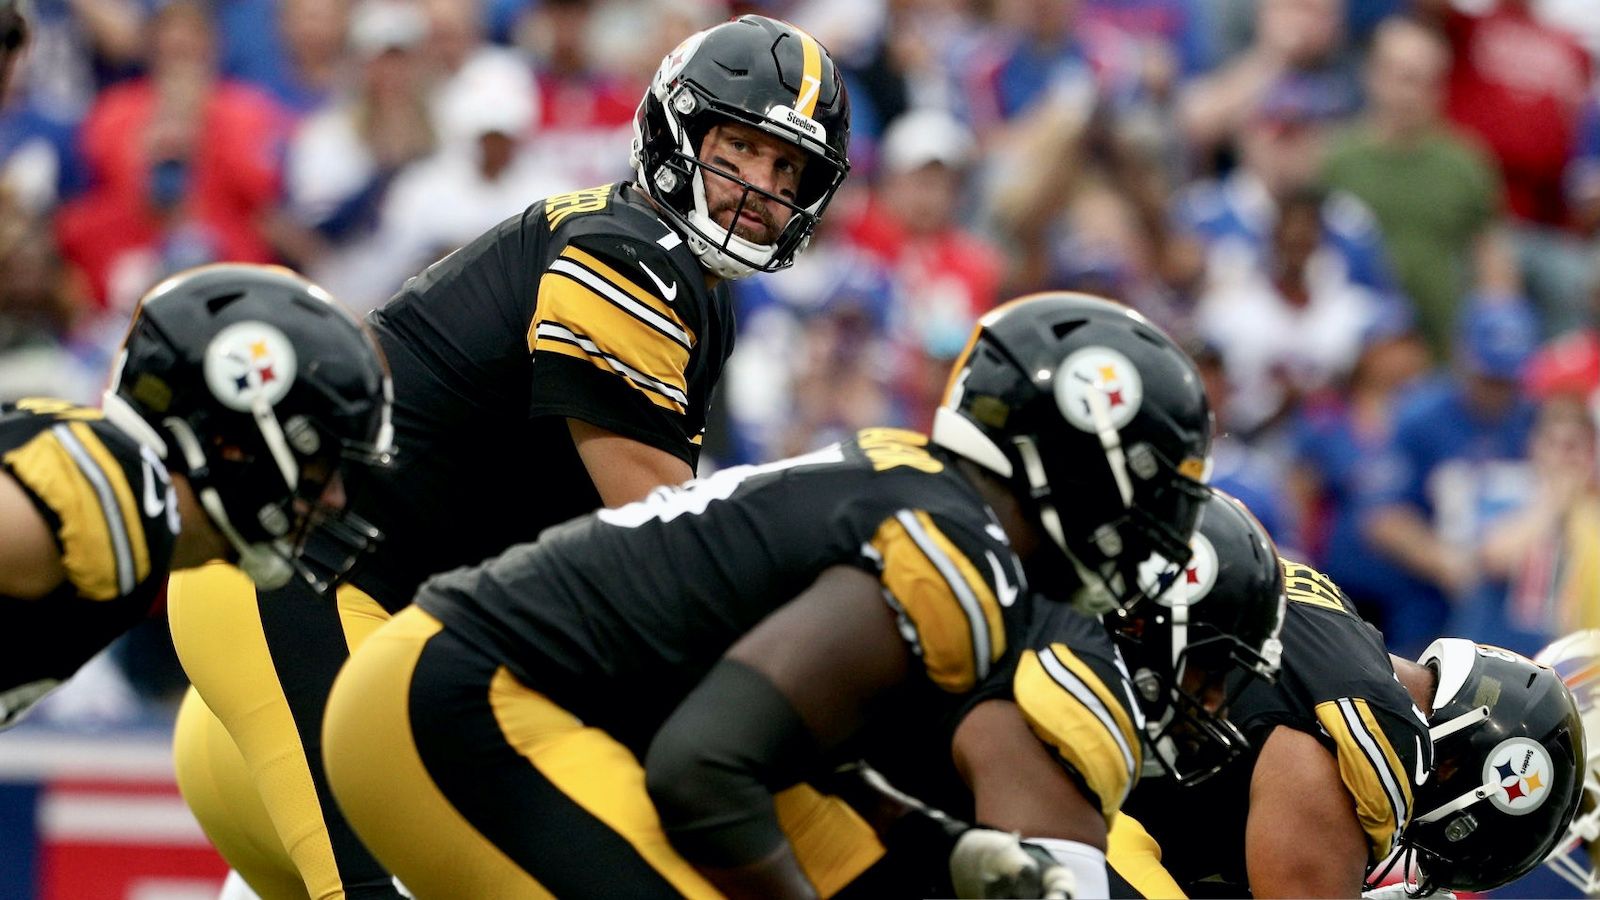 Steelers defense shuts out Bills starting offense